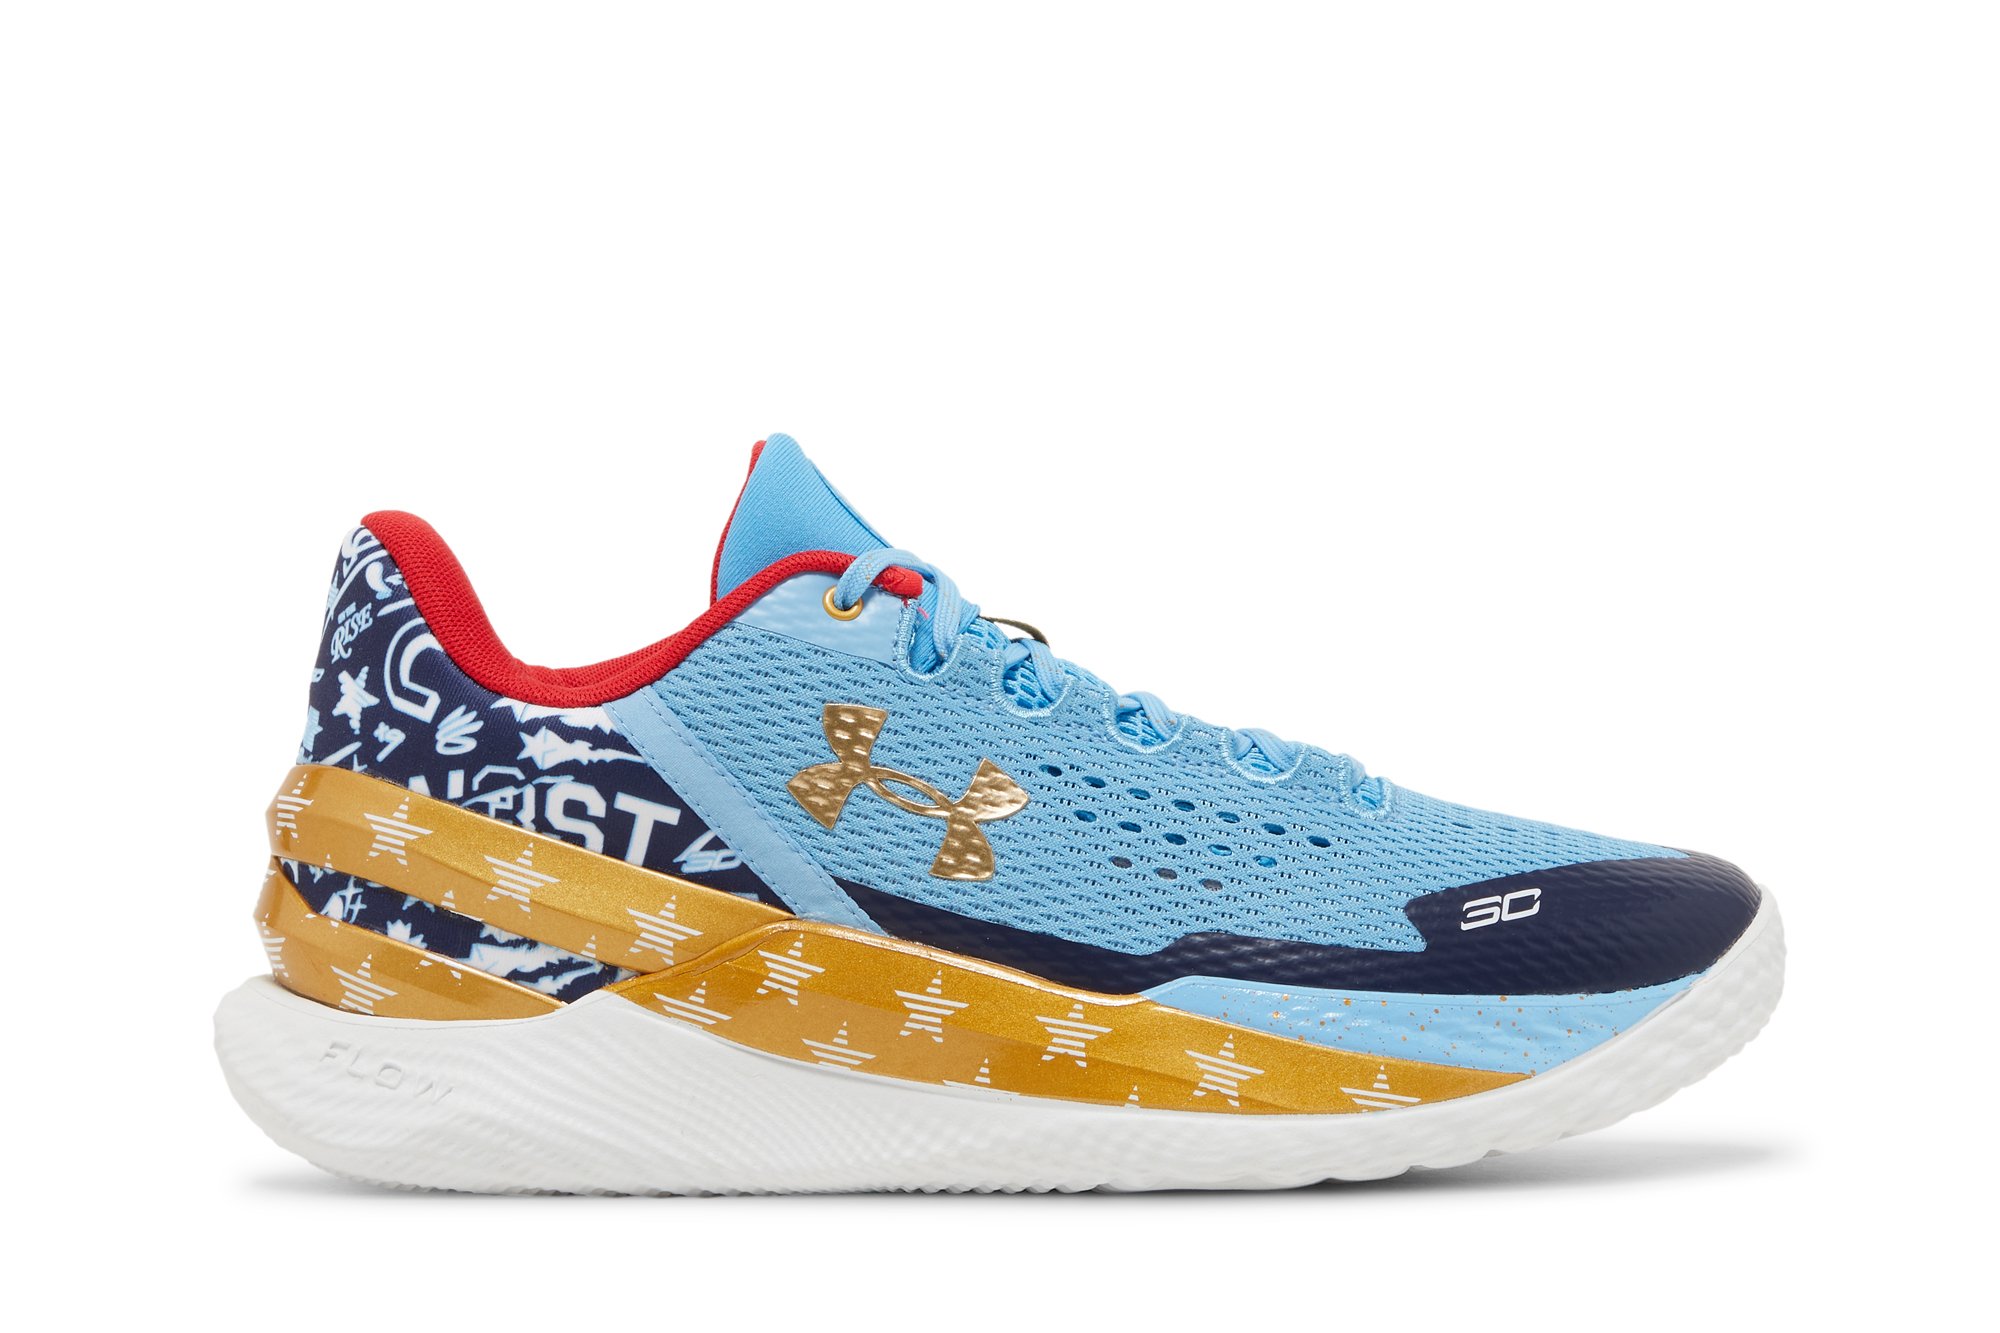 Curry 2 Low FloTro 'All-Star'